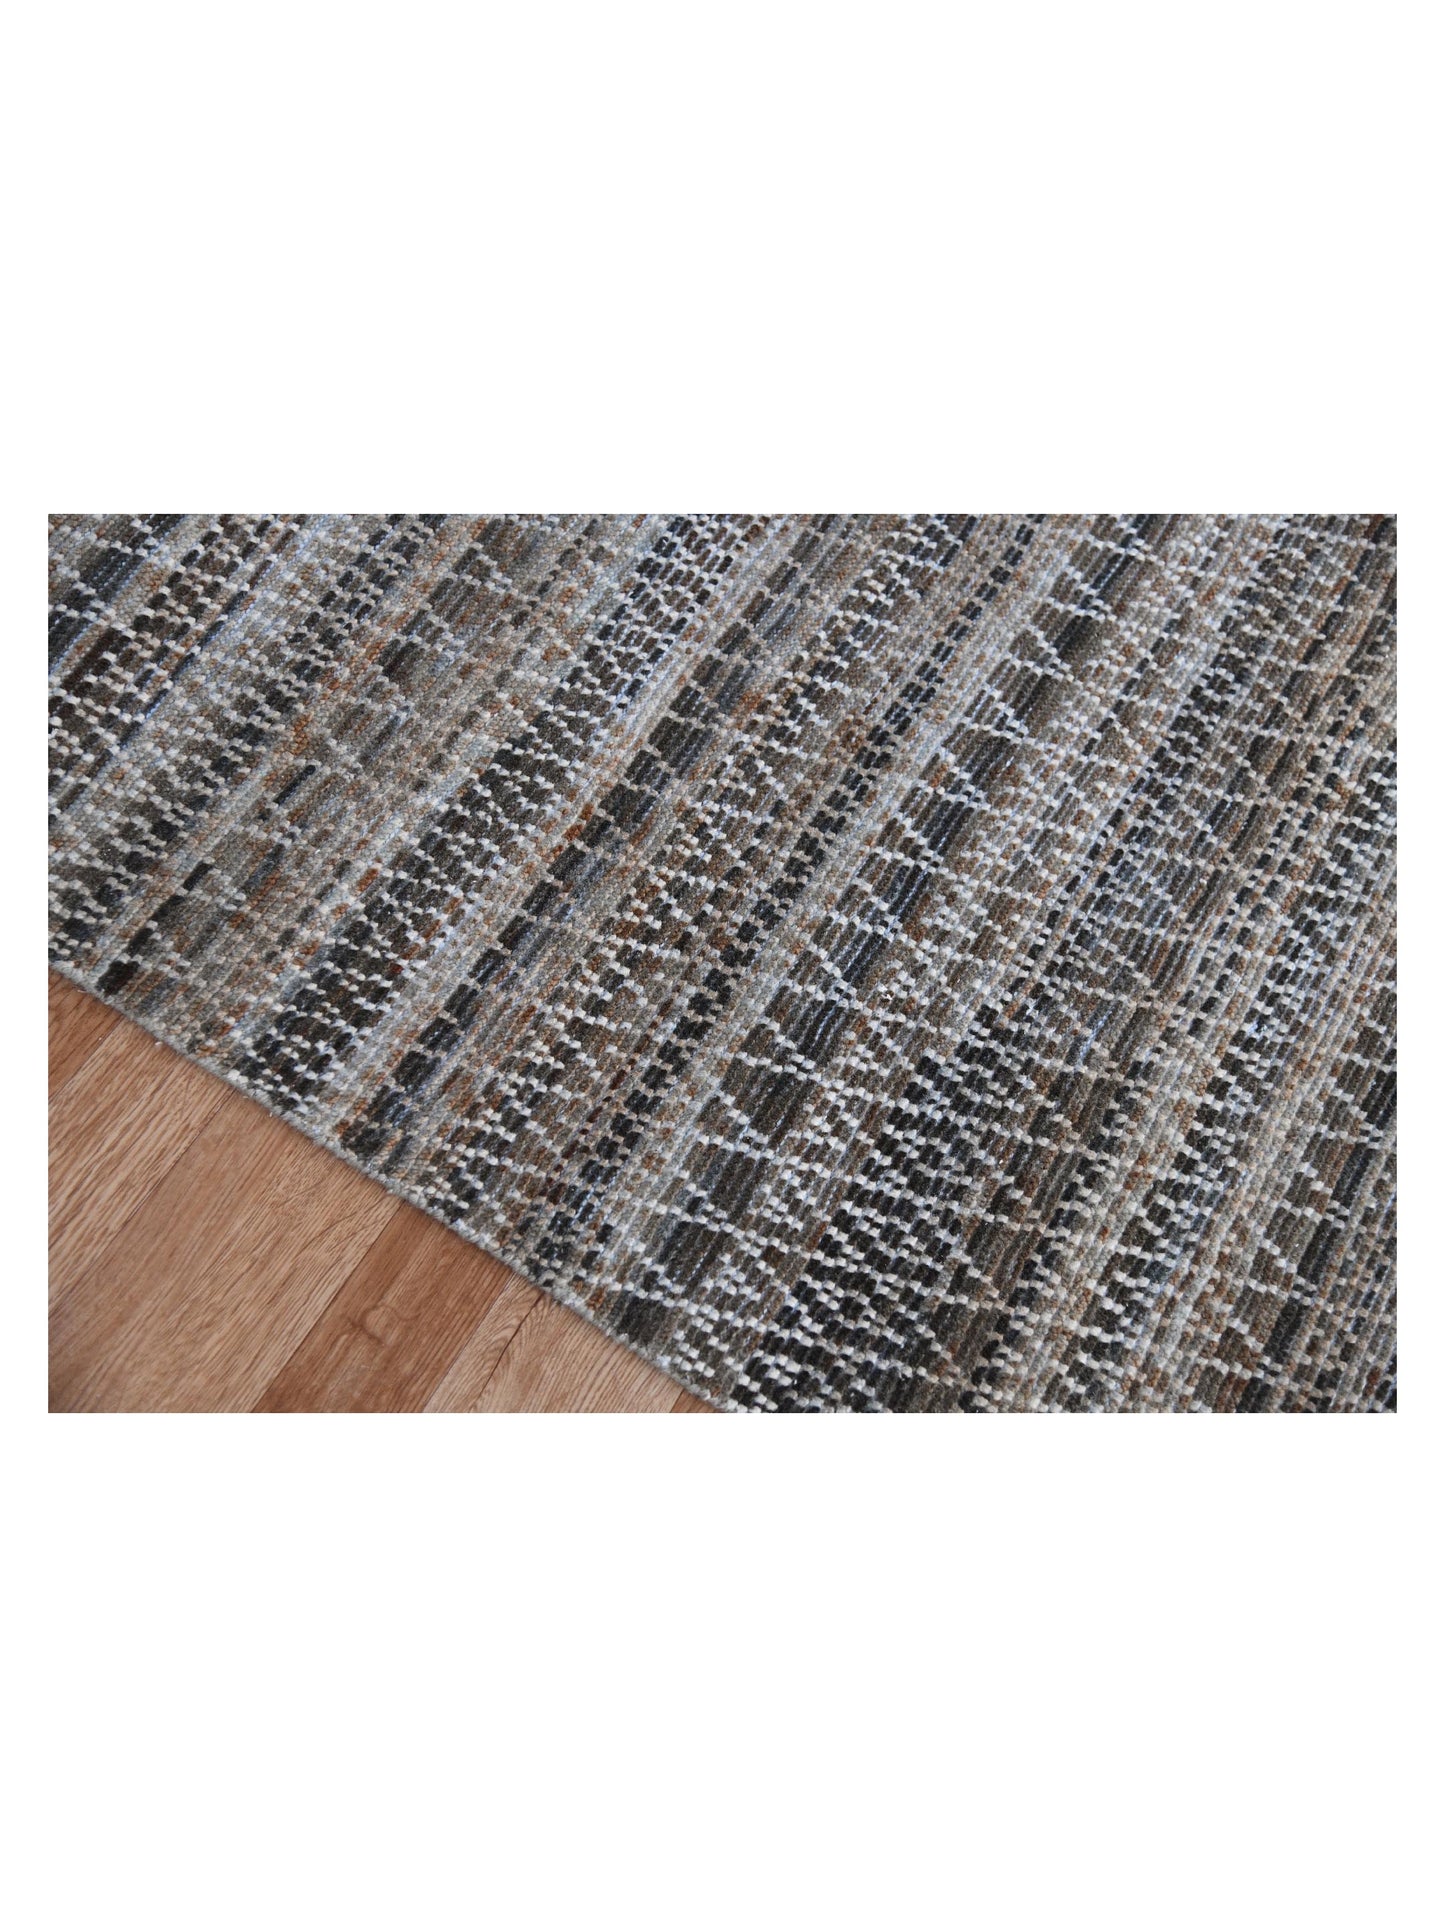 Limited LISMORE LI-107 COOPER GRAY Transitional Knotted Rug